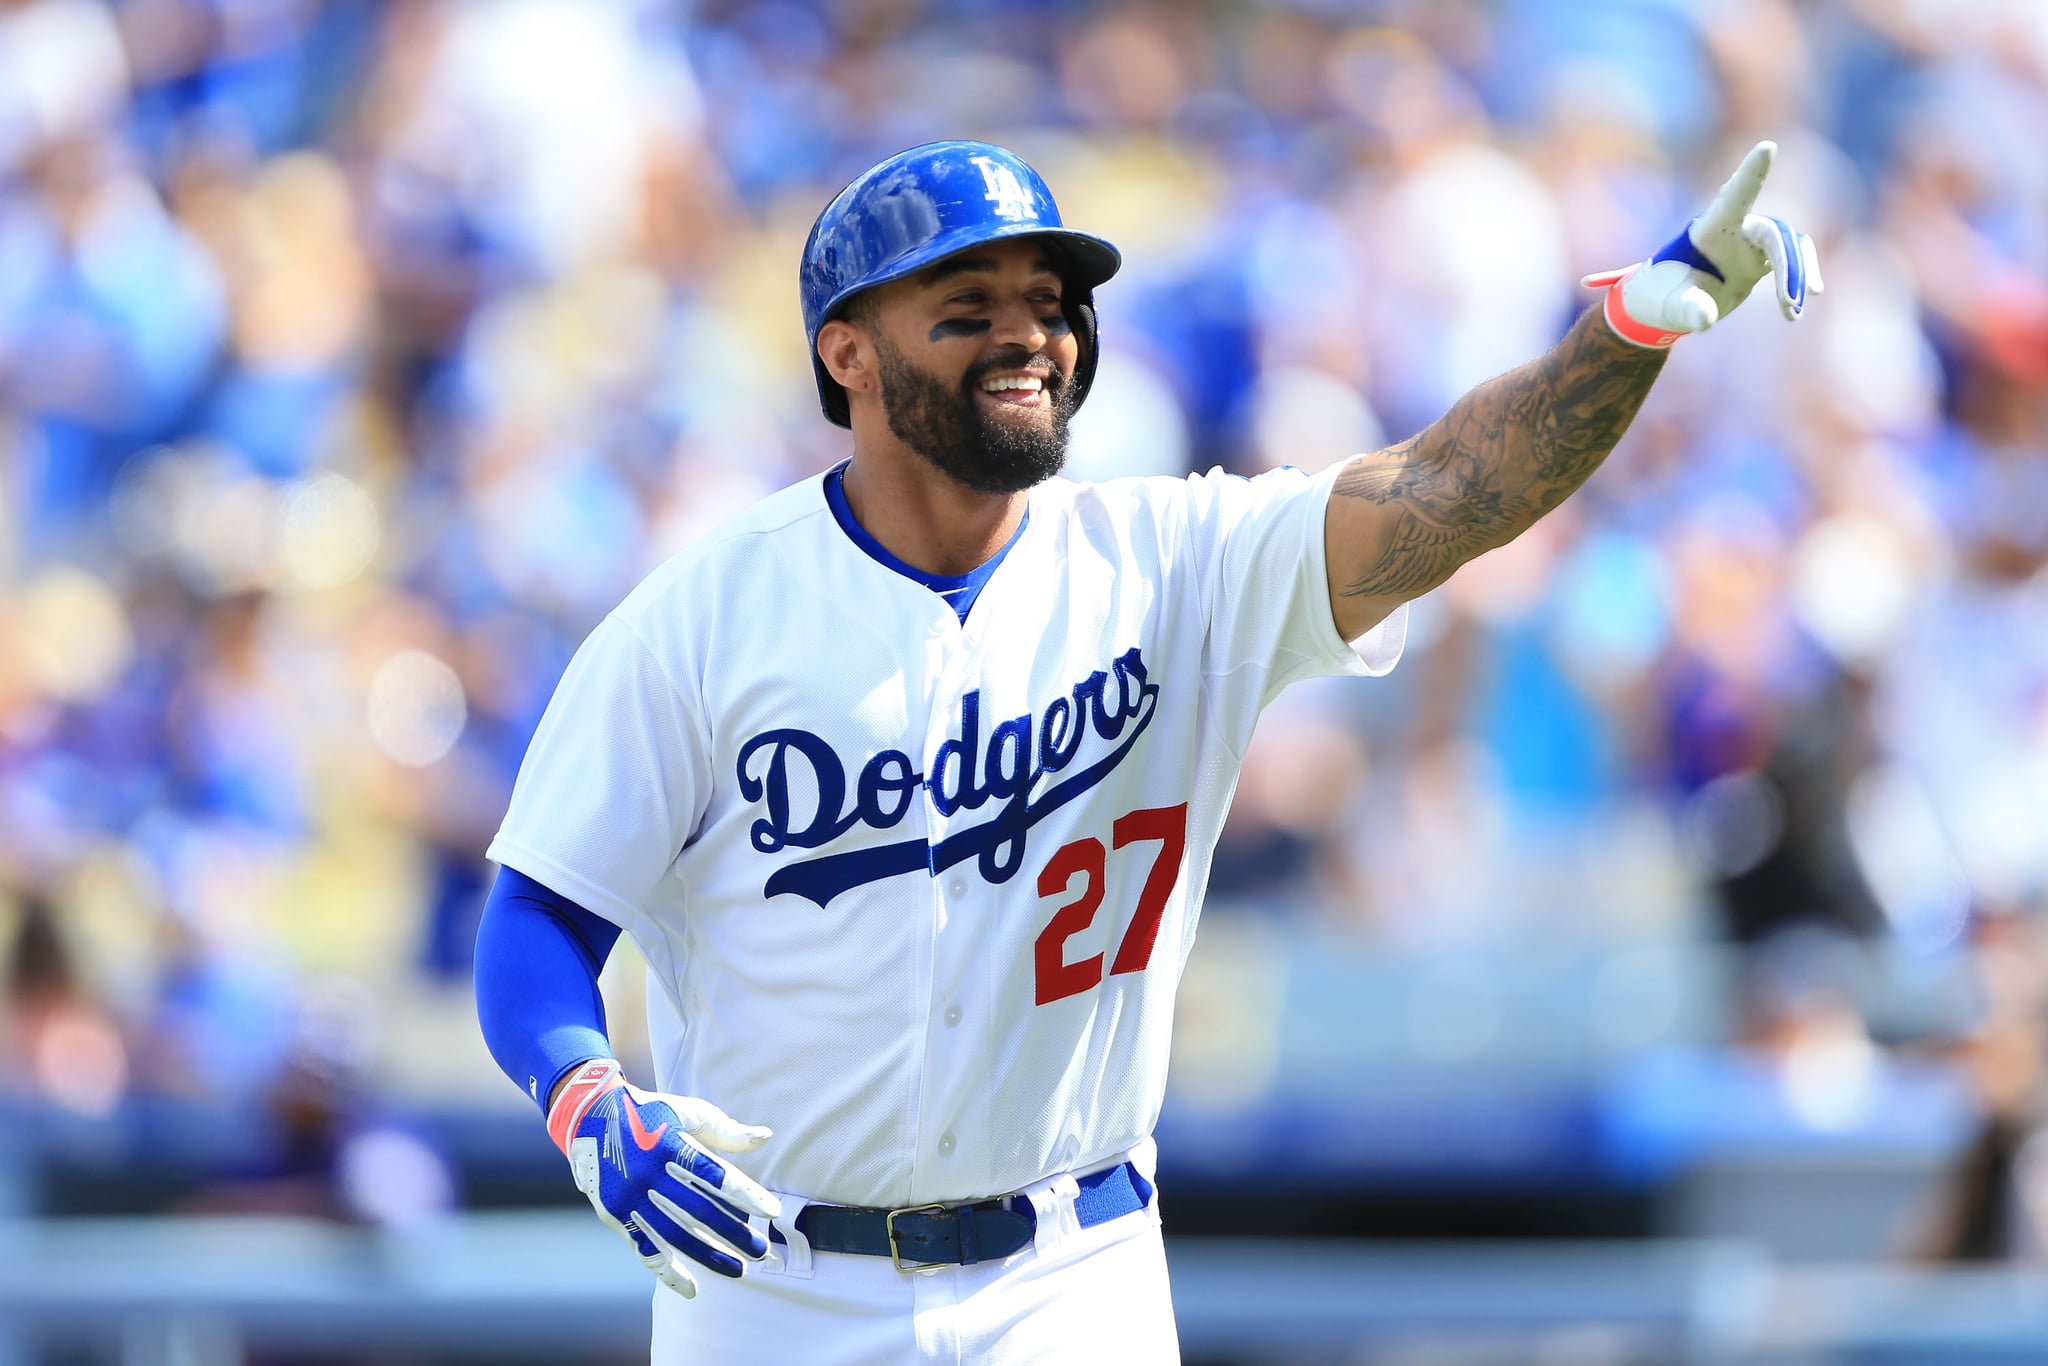 Matt Kemp, 11 Hot Baseball Players That Will Have You Singing Take Me Out  to the Ball Game